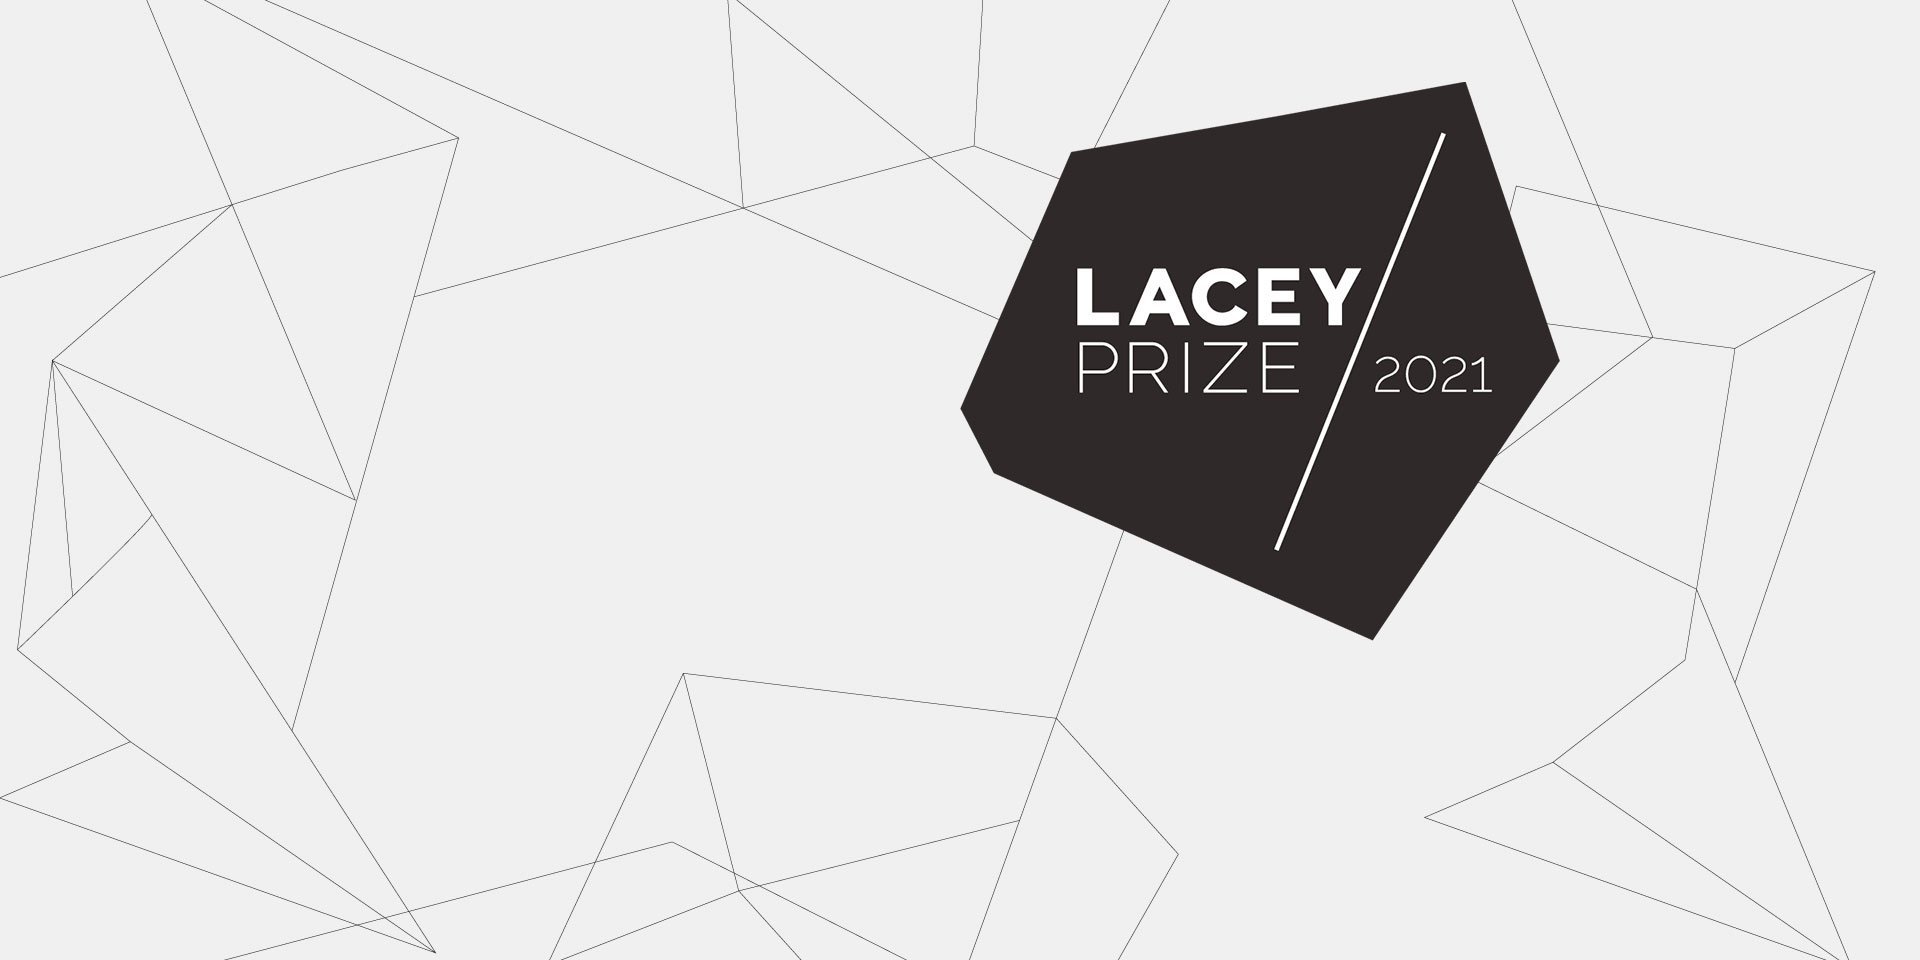 Geometric logo design for the 2021 Lacey Prize, black, grey and white